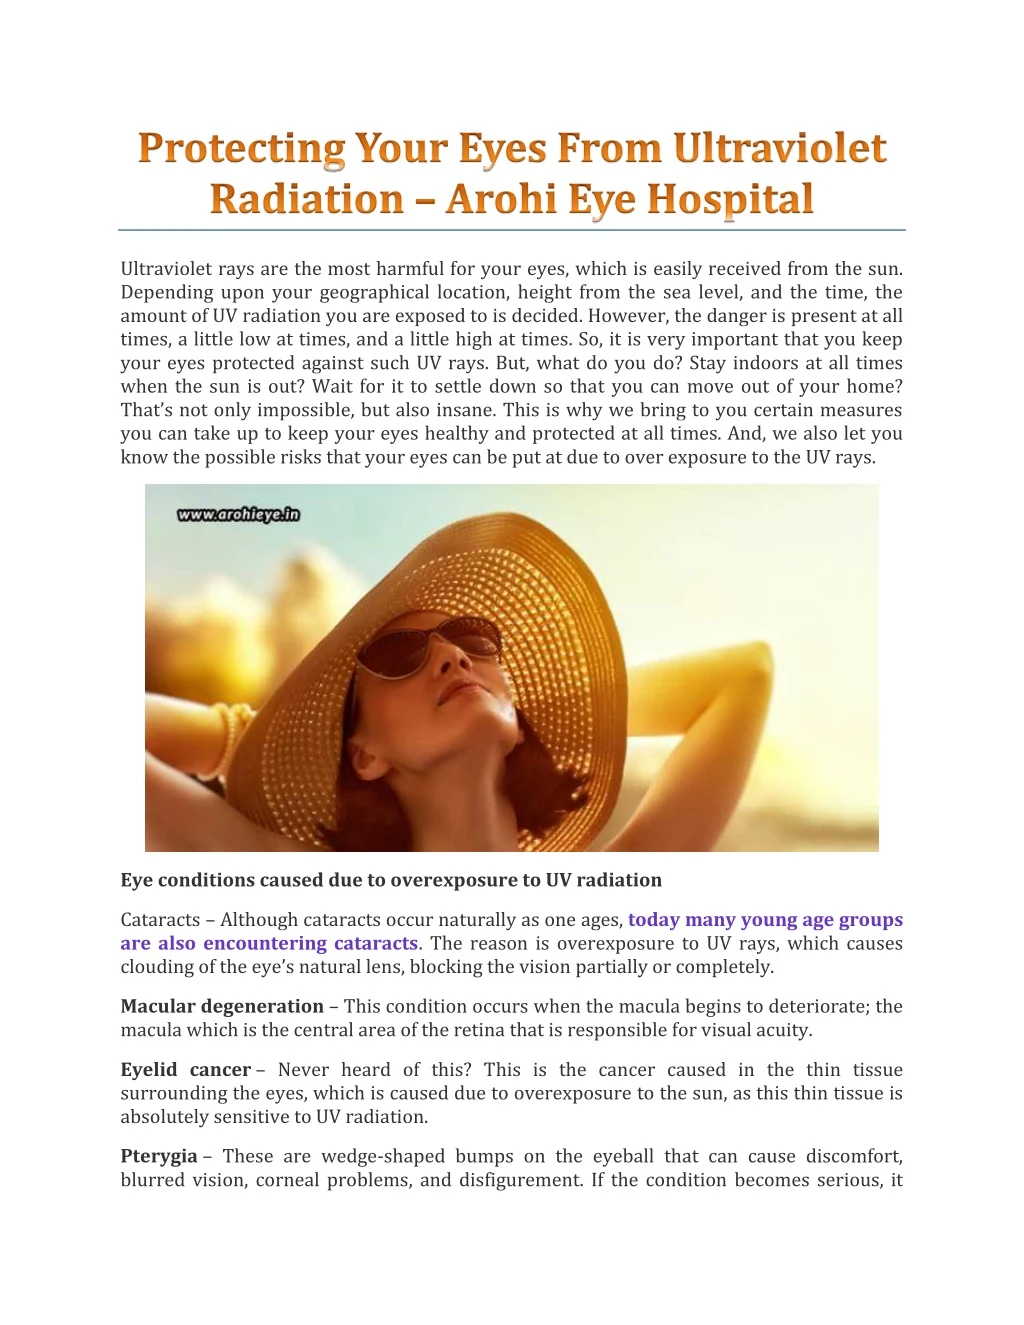 ultraviolet rays are the most harmful for your